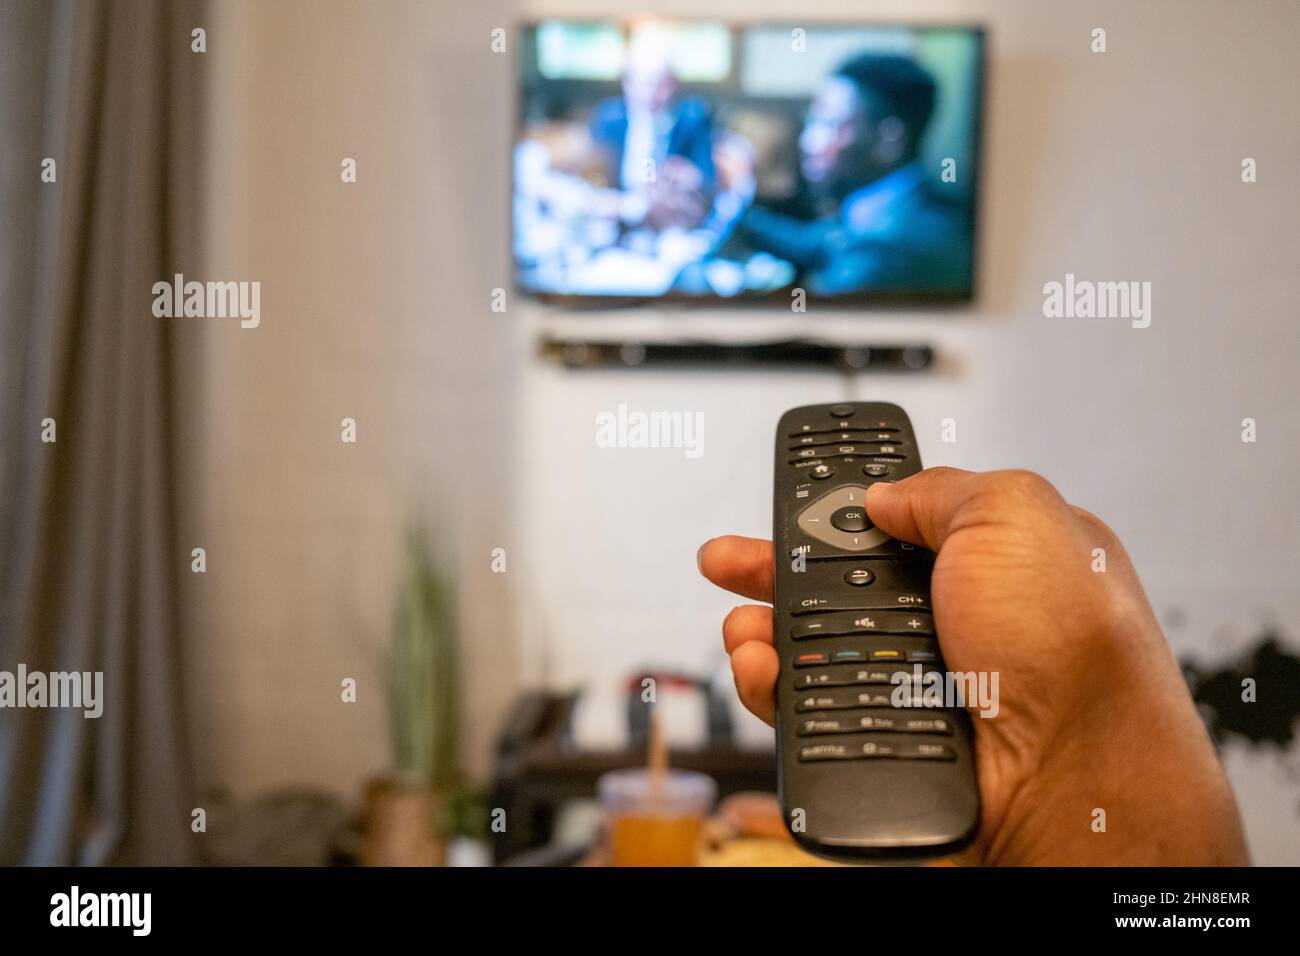 Close-up of man pushing the buttons on remote control to switch the channel on TV in the room Stock Photo